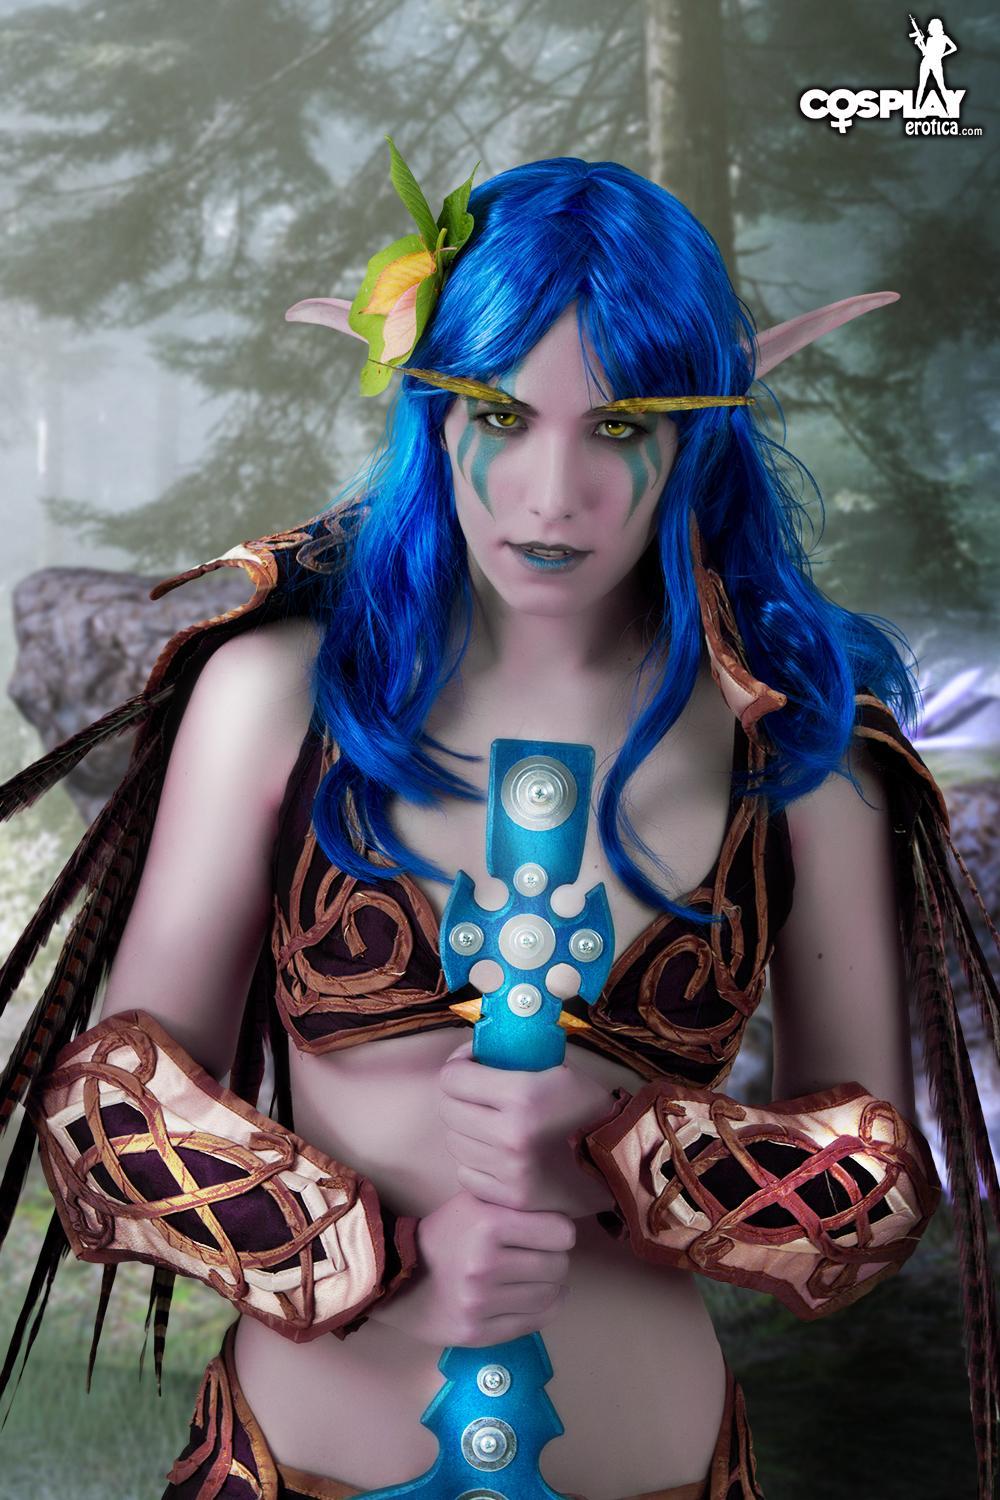 Cosplay hottie Cassie invites you on her Crystal Quest #53702508